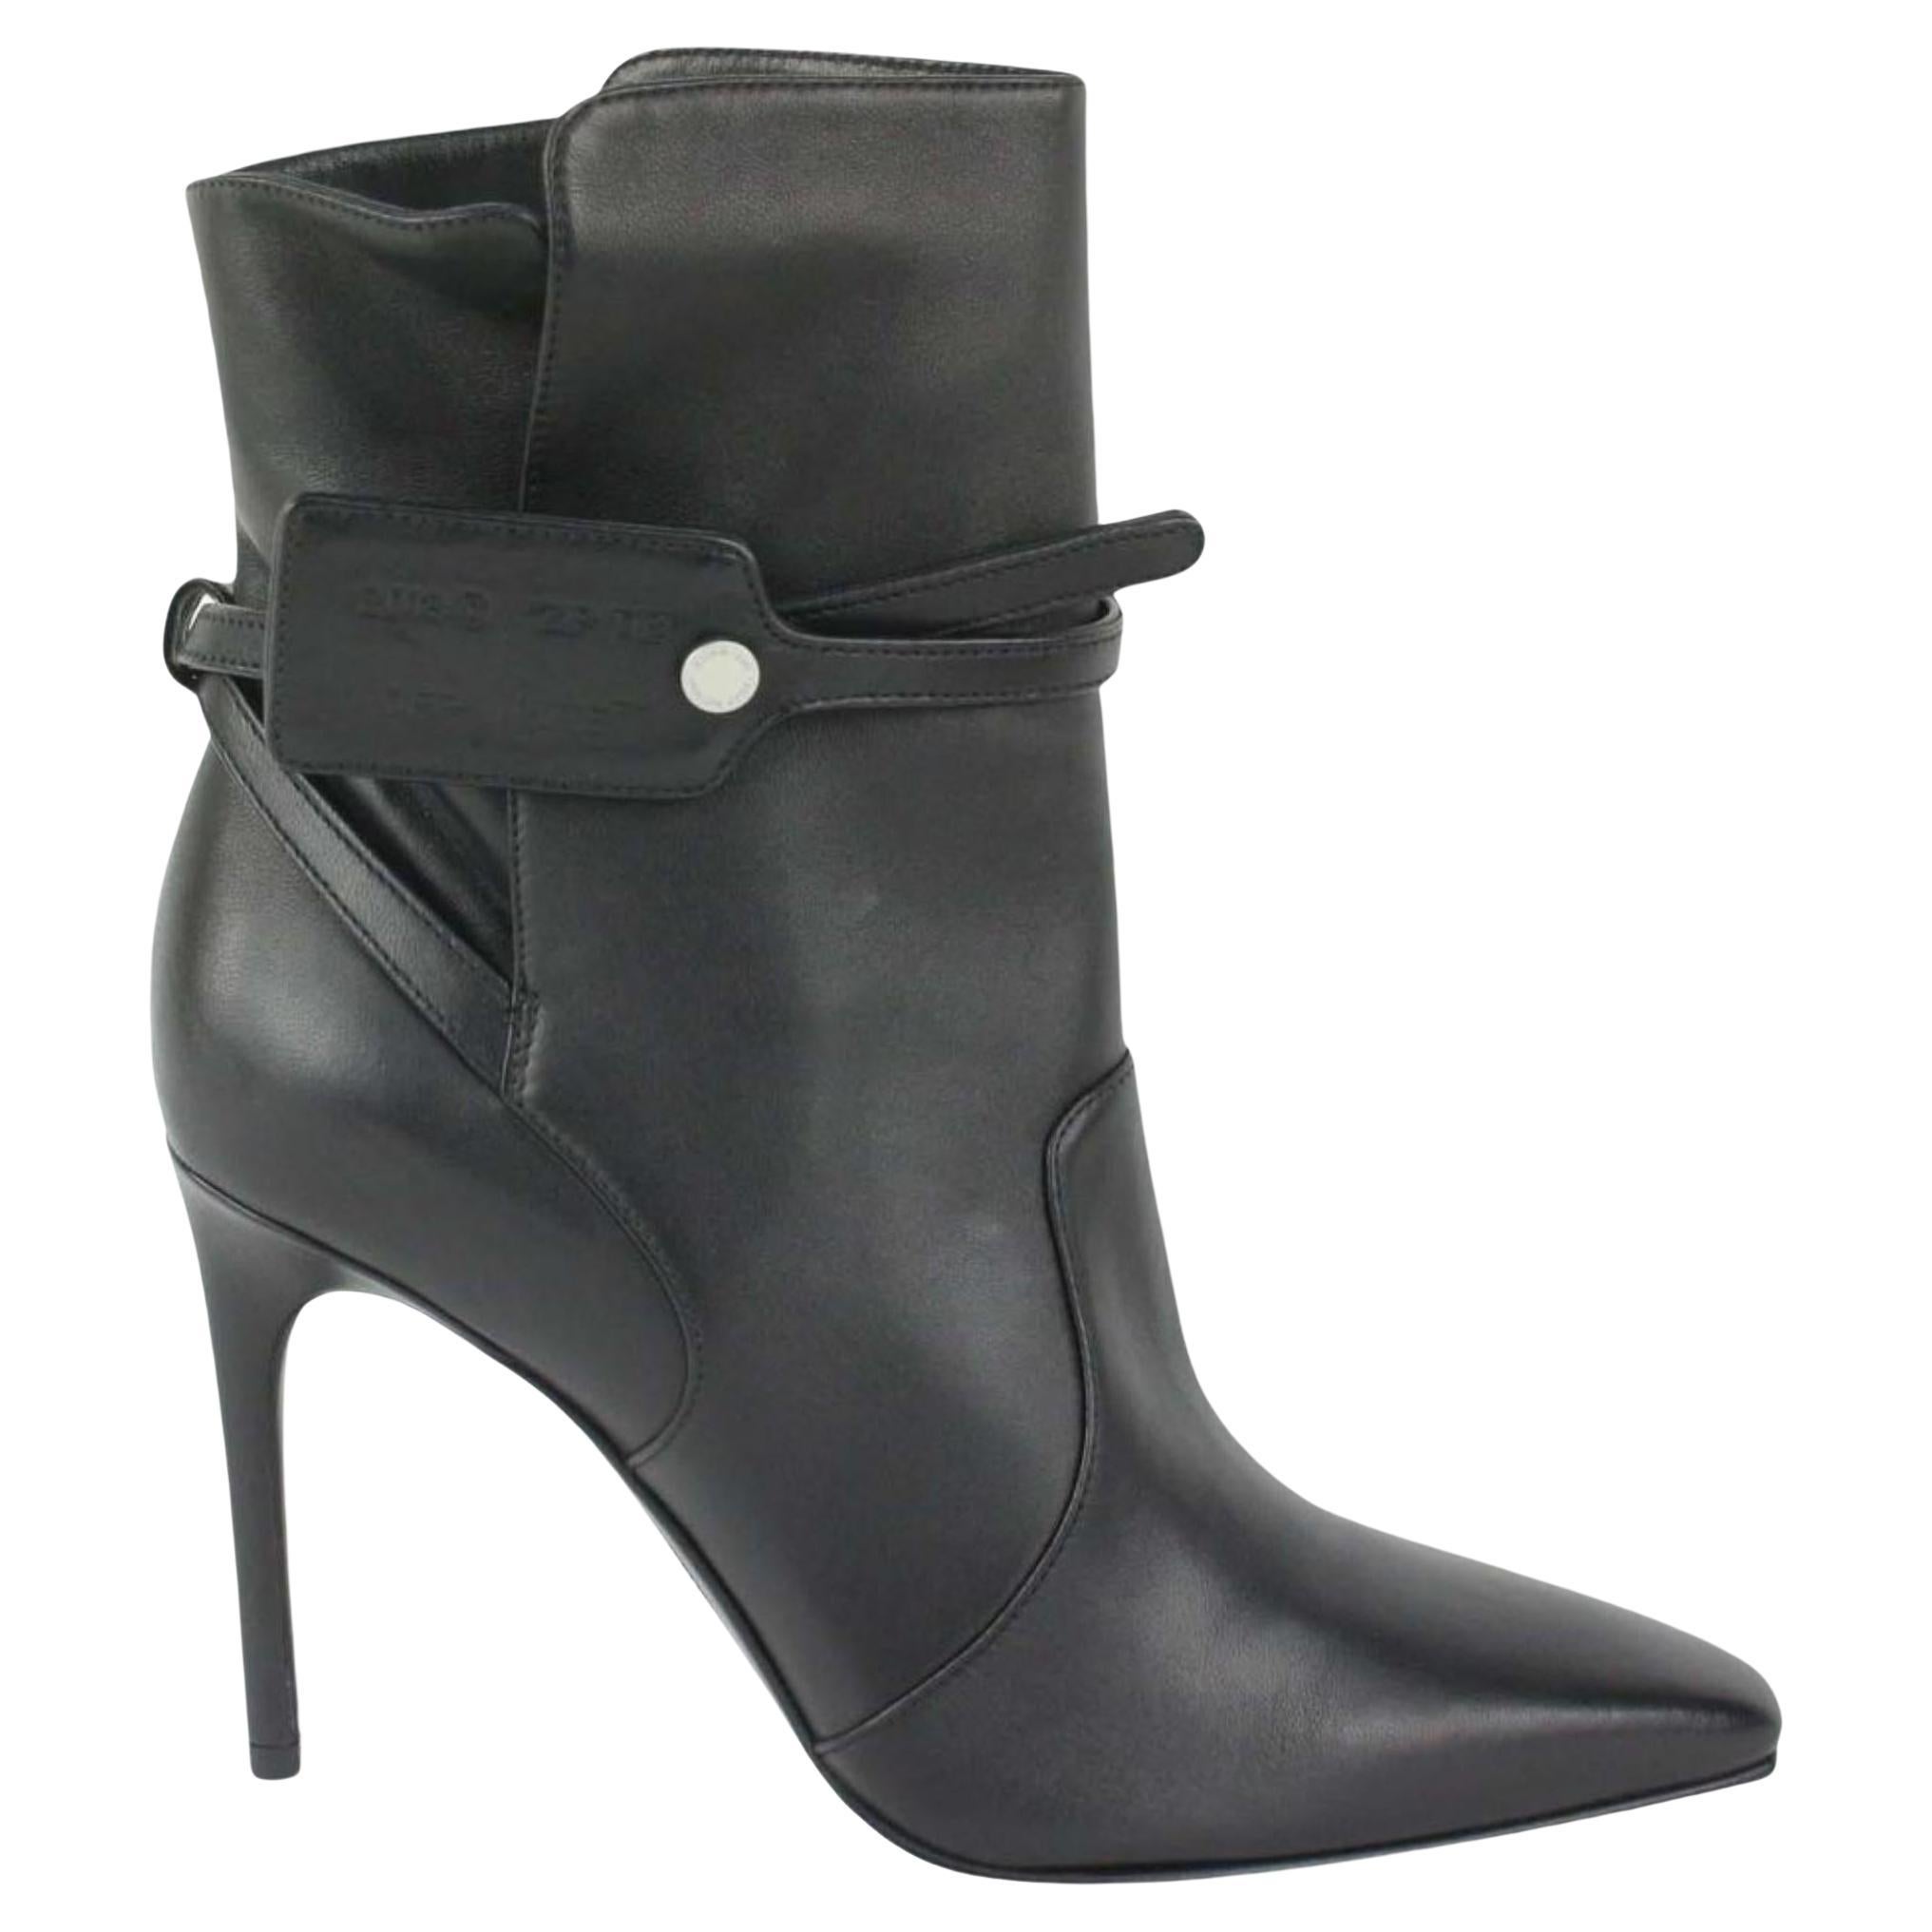 Off-White Sz 38 Black Leather Ziptie Bootie 106of14 For Sale